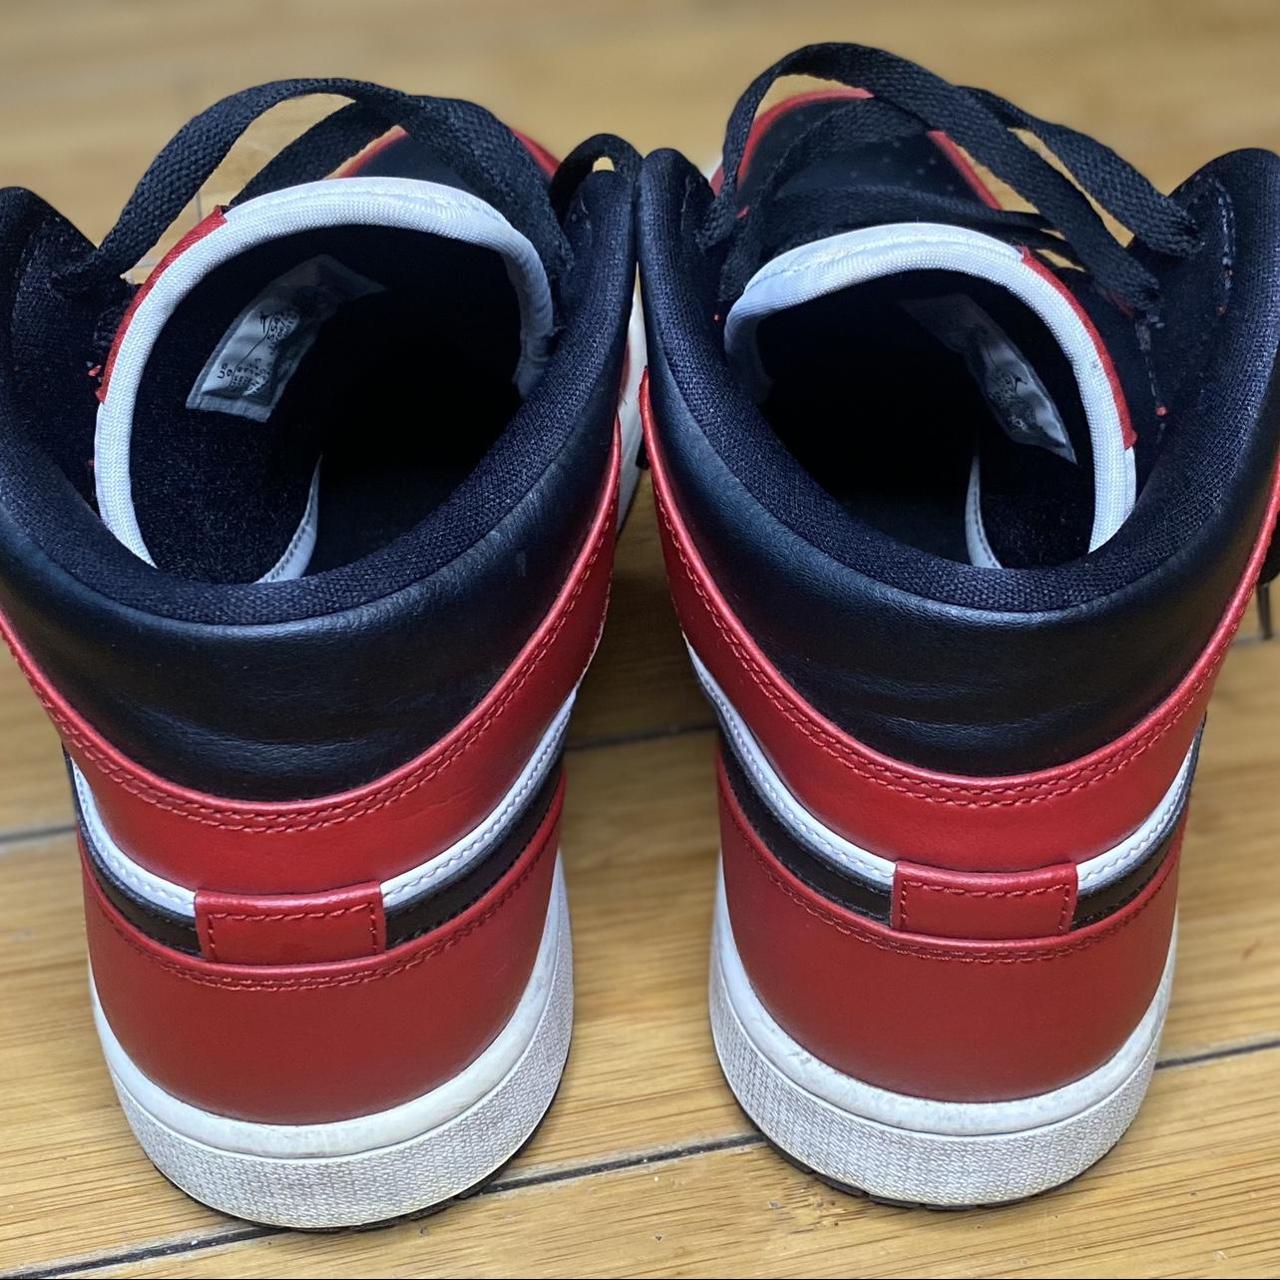 Nike Men's Red and Black Trainers | Depop